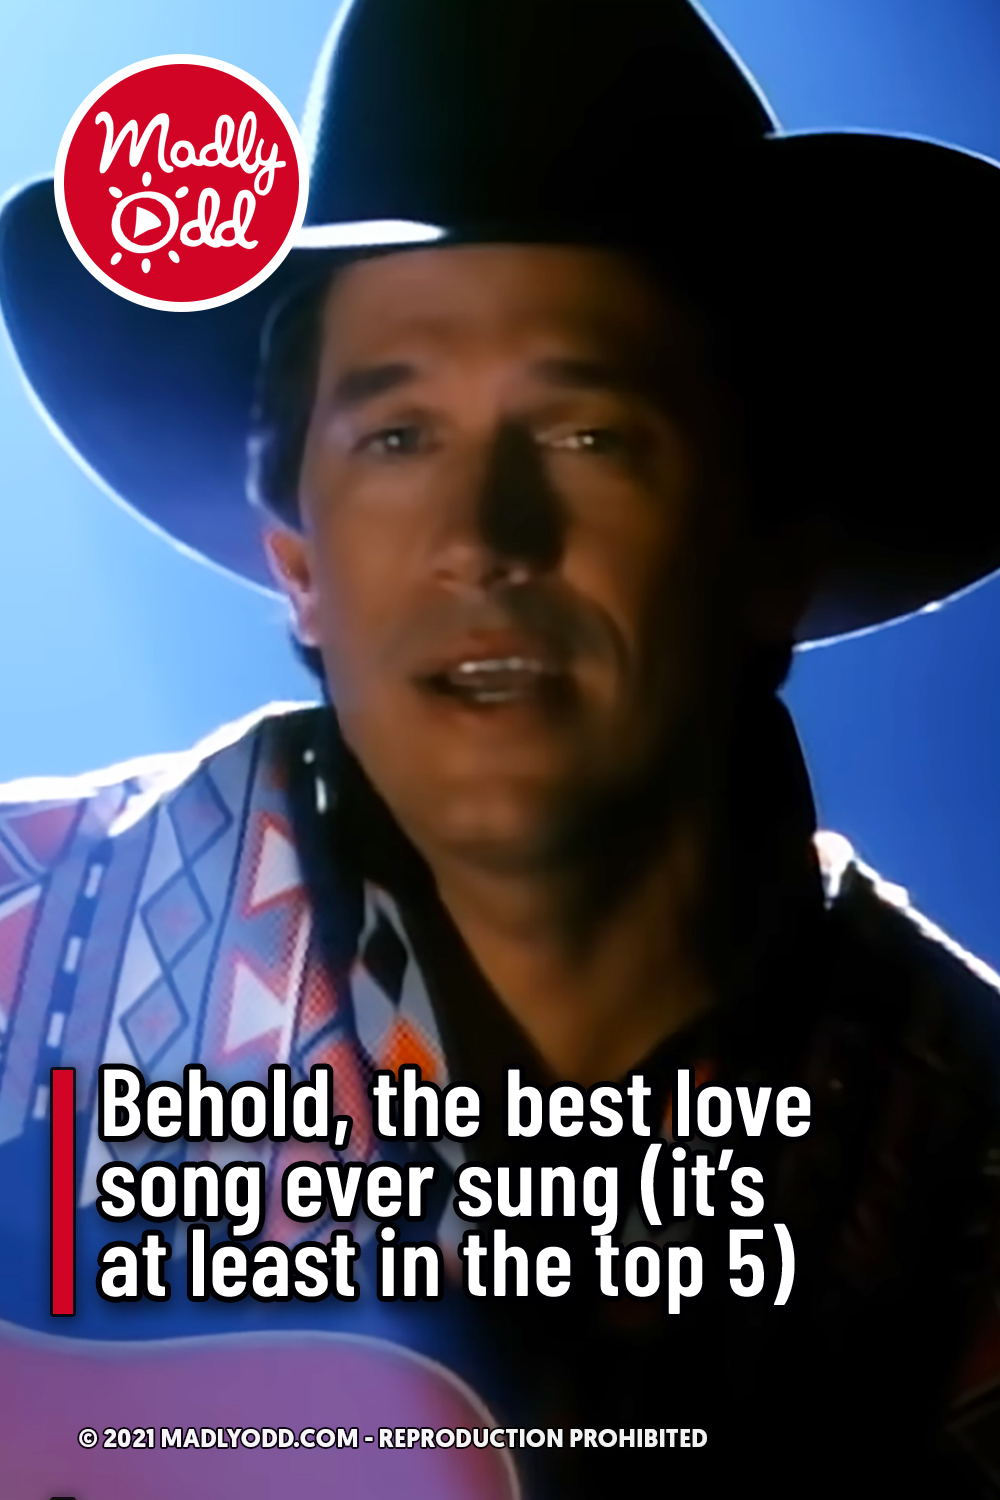 Behold, the best love song ever sung (it’s at least in the top 5)